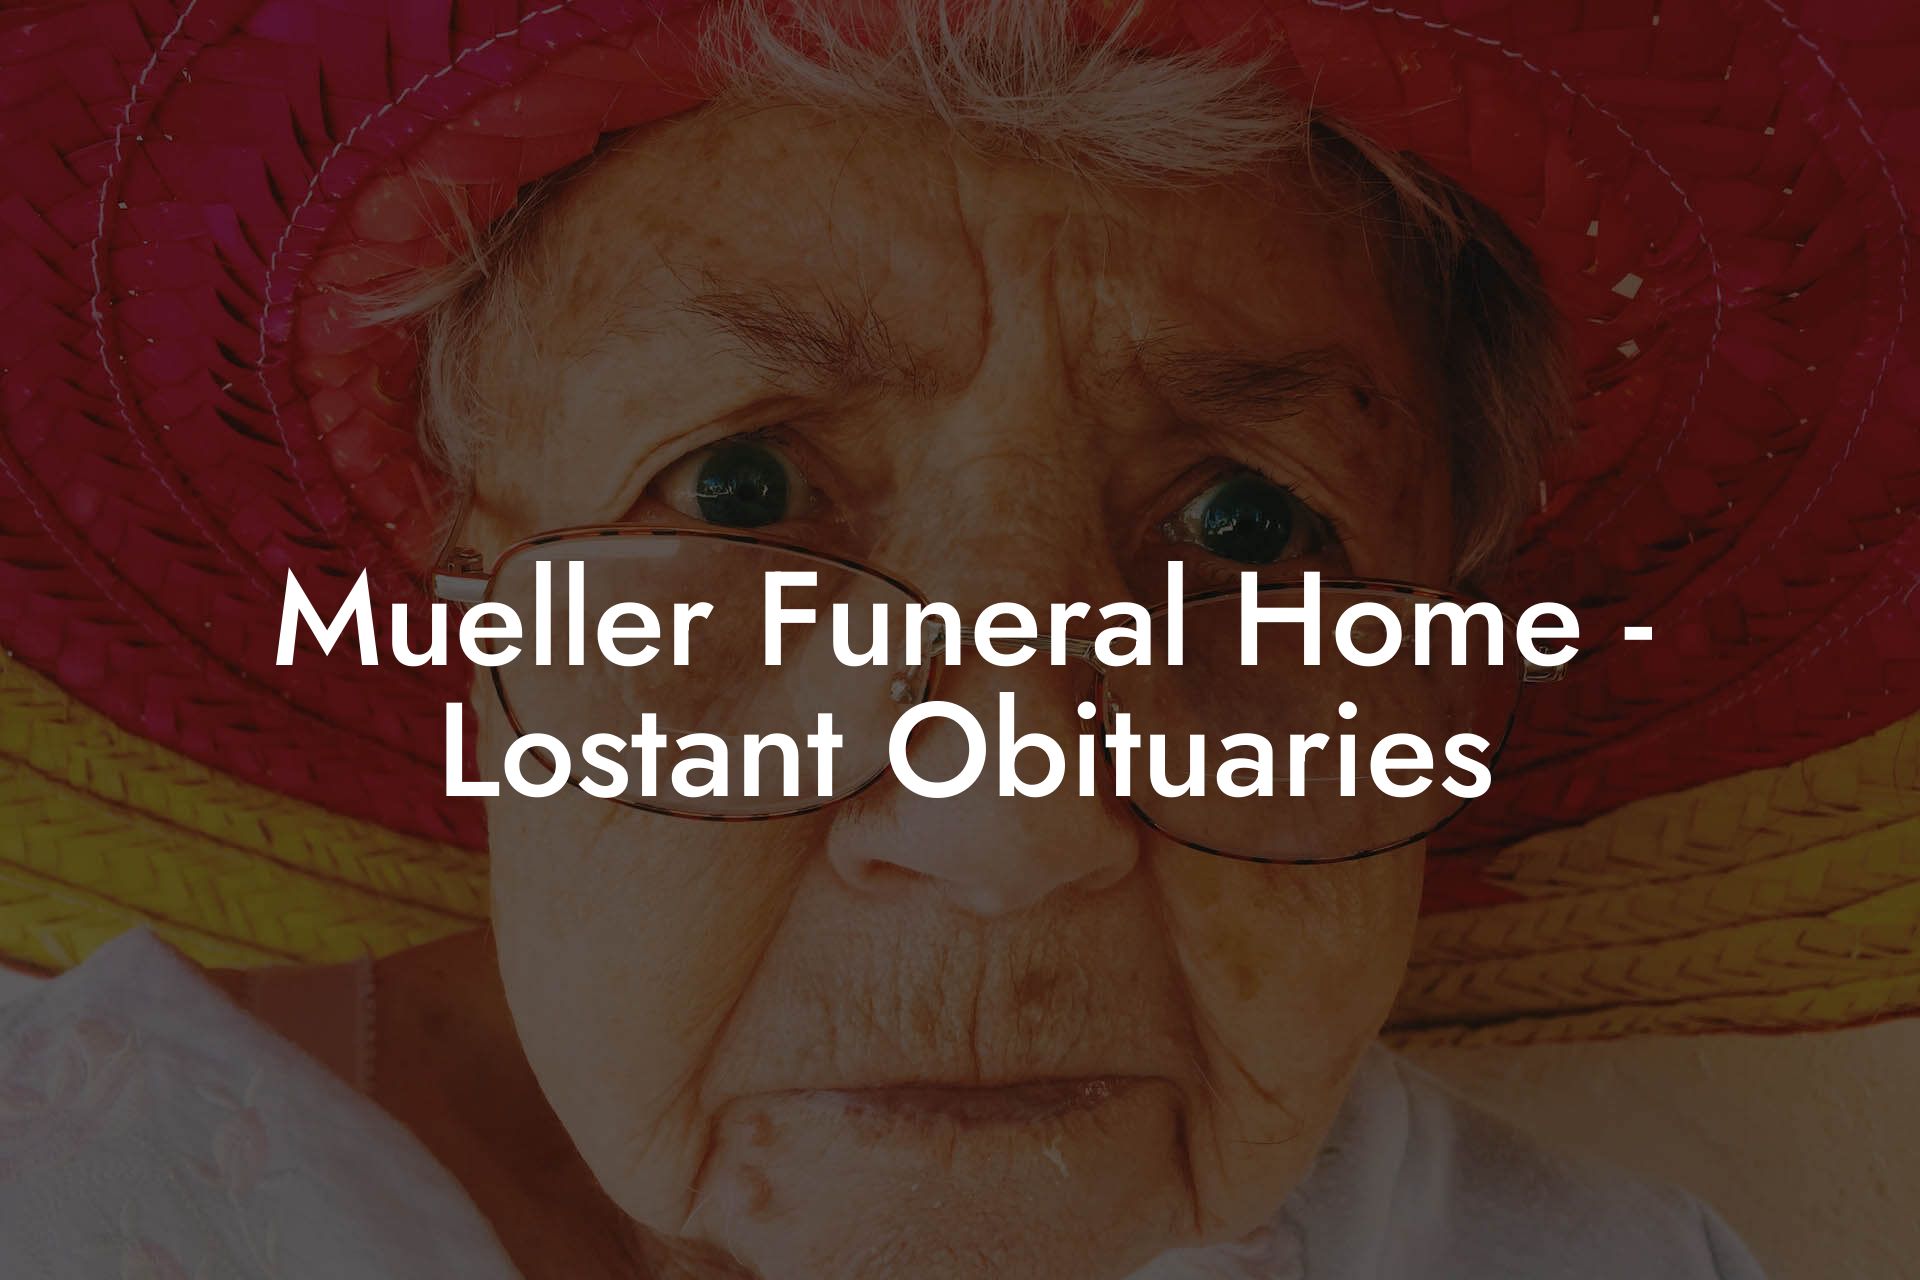 Mueller Funeral Home - Lostant Obituaries